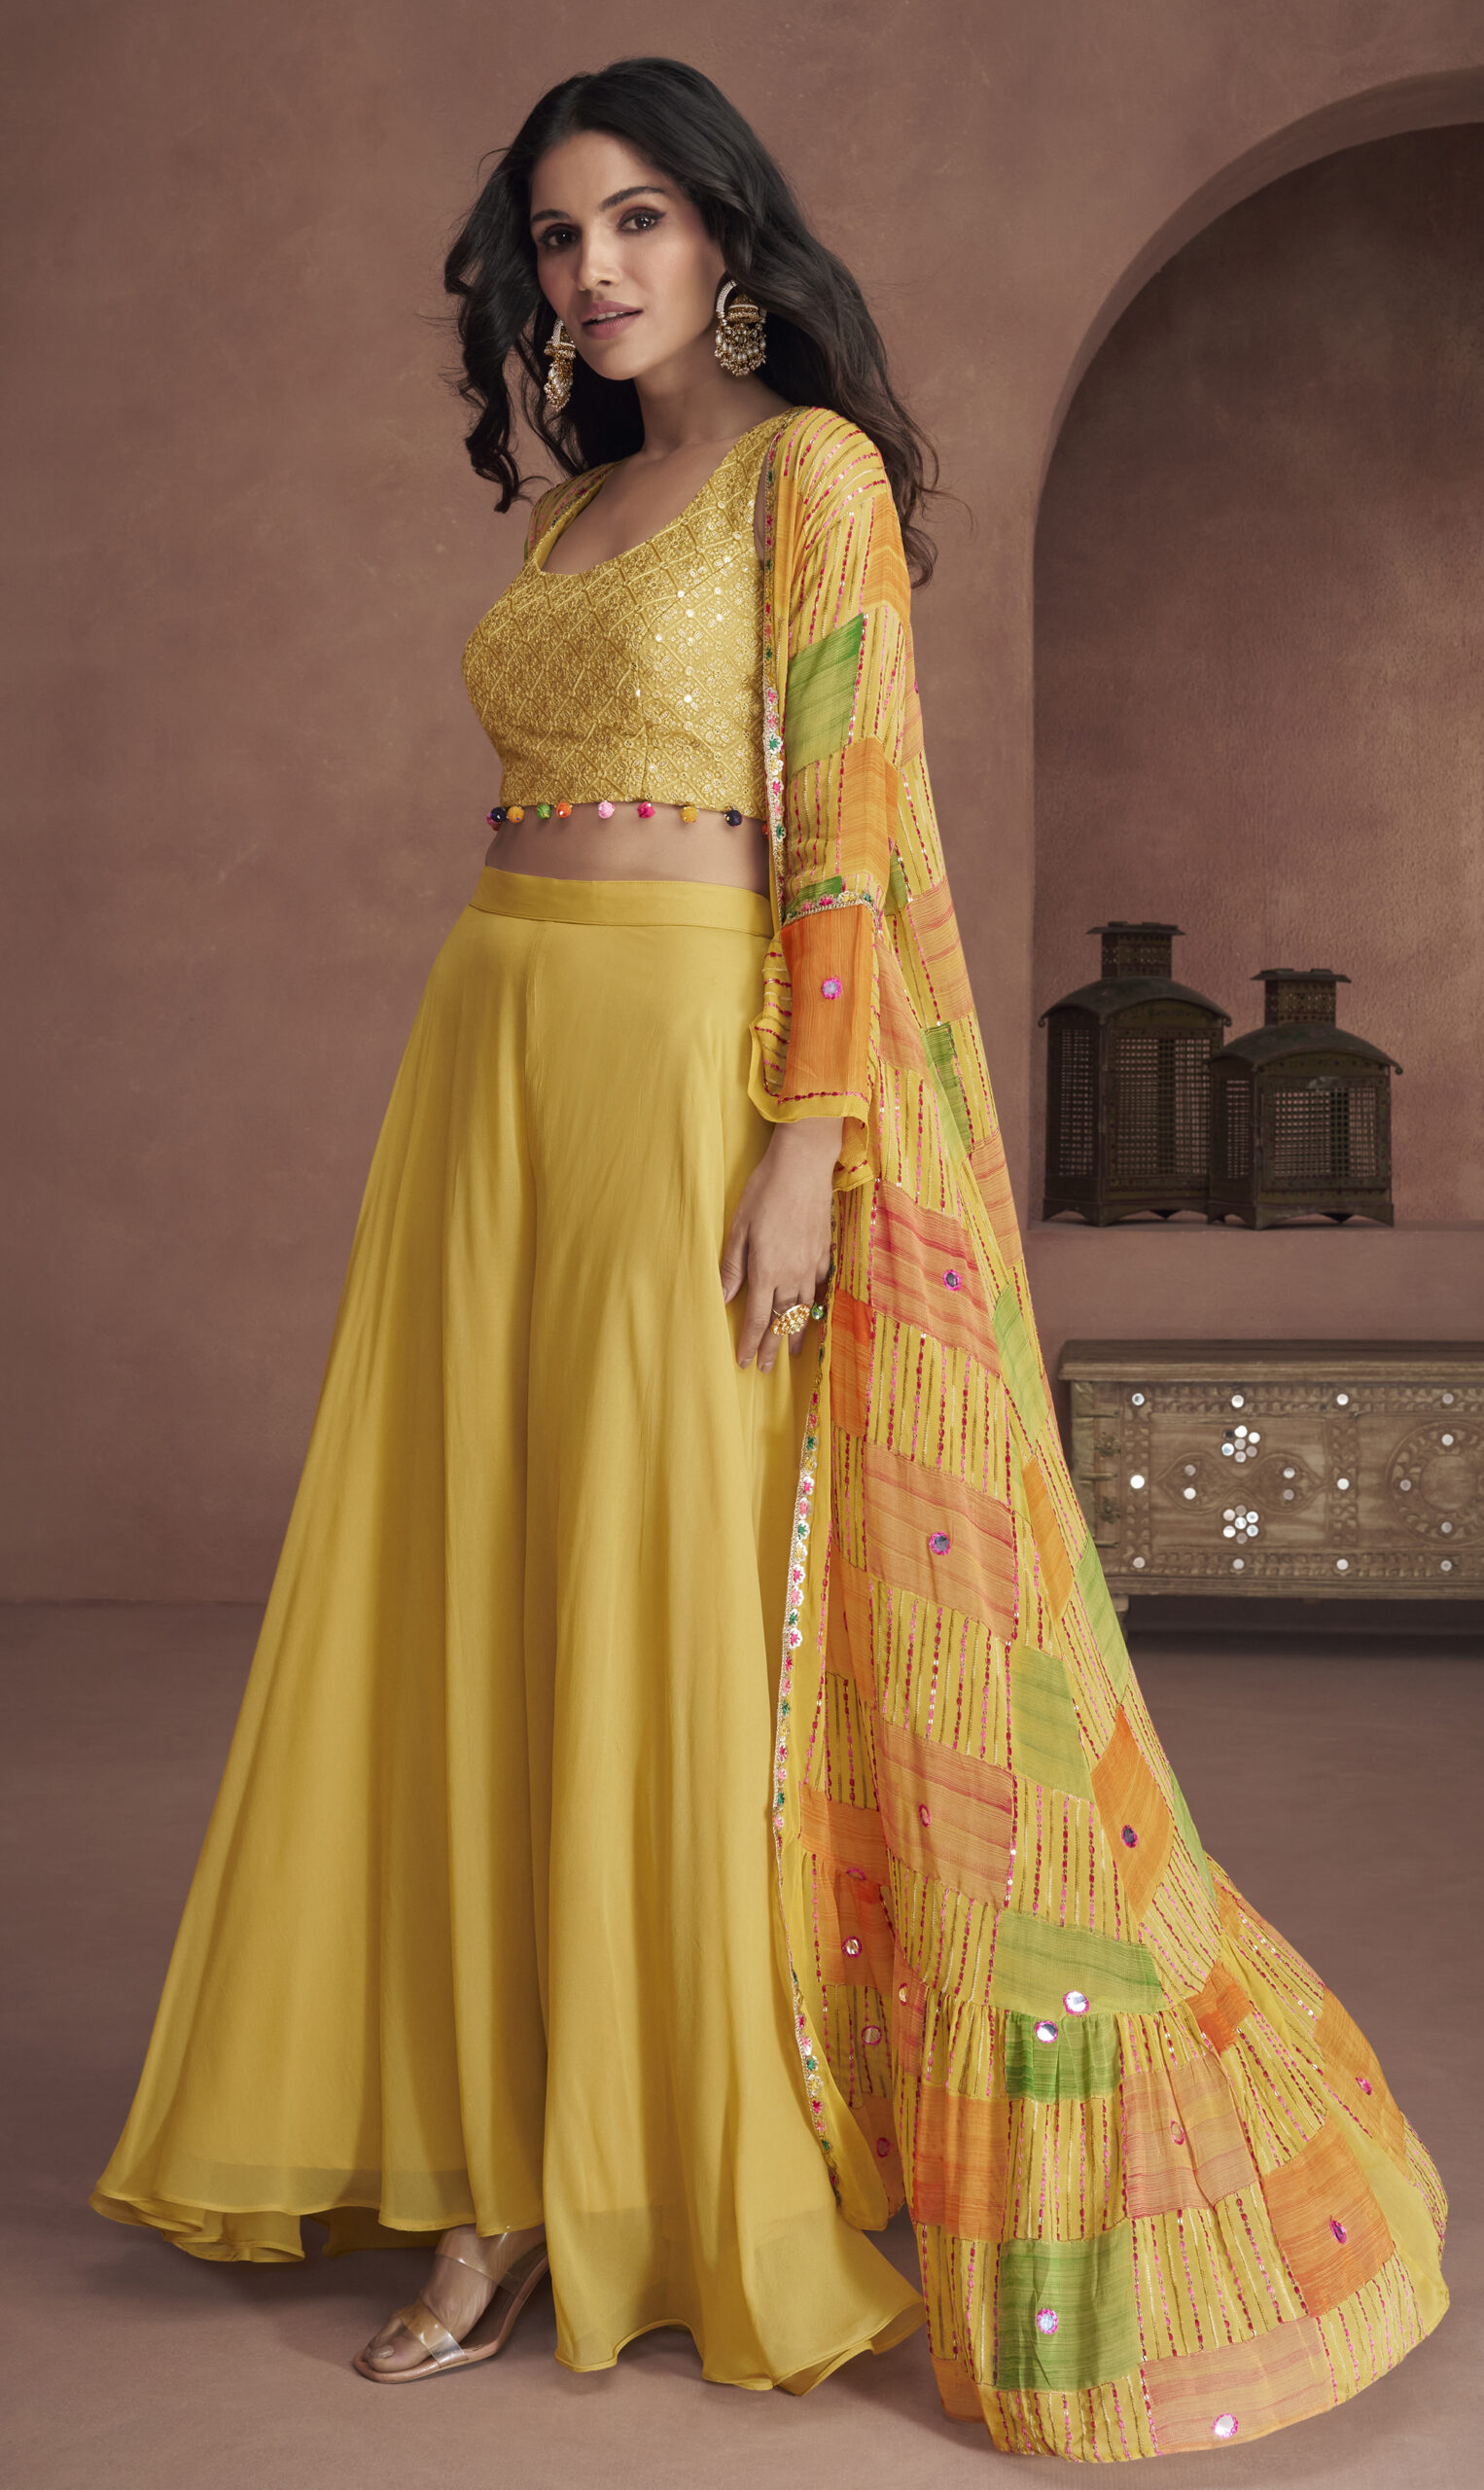 Haldi Gown in Georgette With Digital Print Bollywood Haldi Ceremony Gown |  Combination dresses, Floral print gowns, Printed gowns